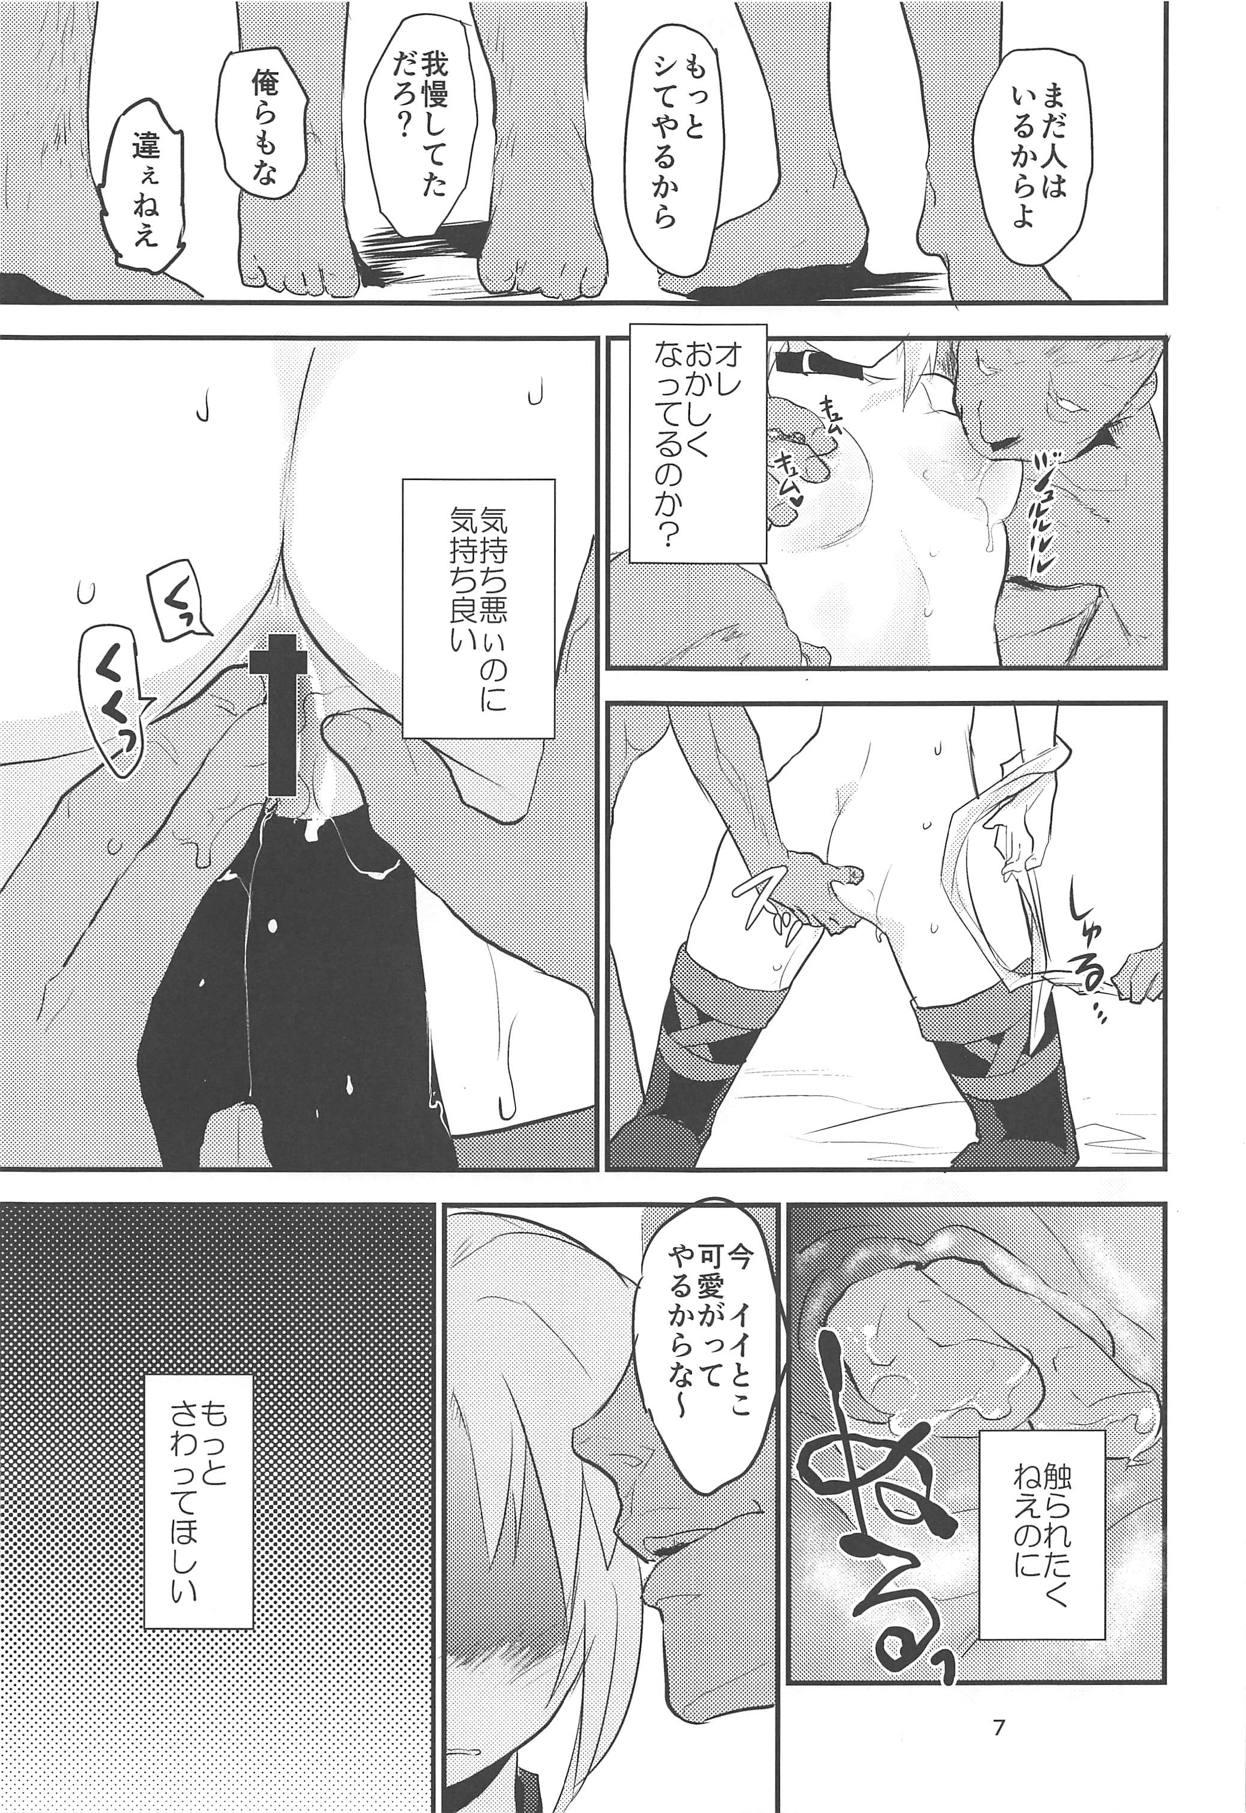 Boobs Erotic to Knight - Fate grand order Girl Gets Fucked - Page 6